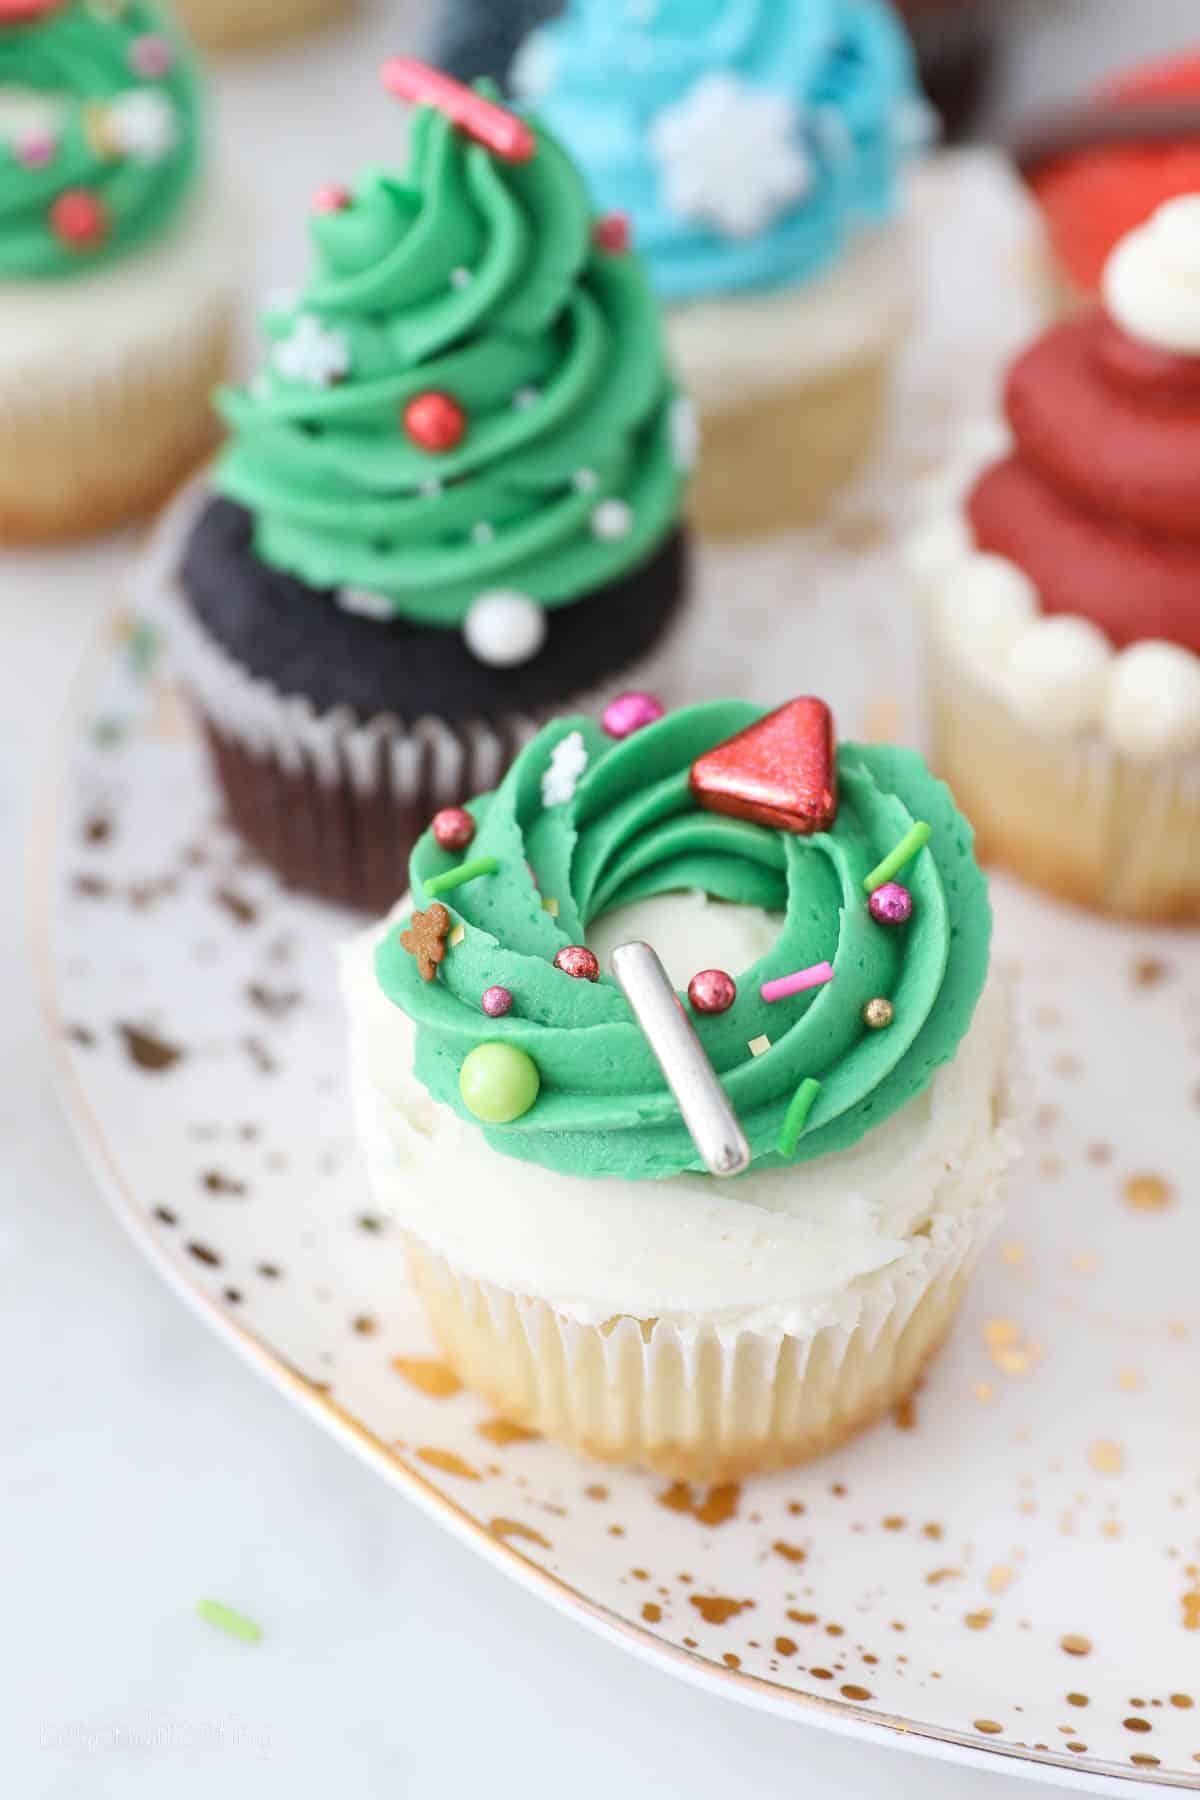 Assorted Christmas cupcakes decorated with a buttercream Christmas tree and a wreath with sprinkles.